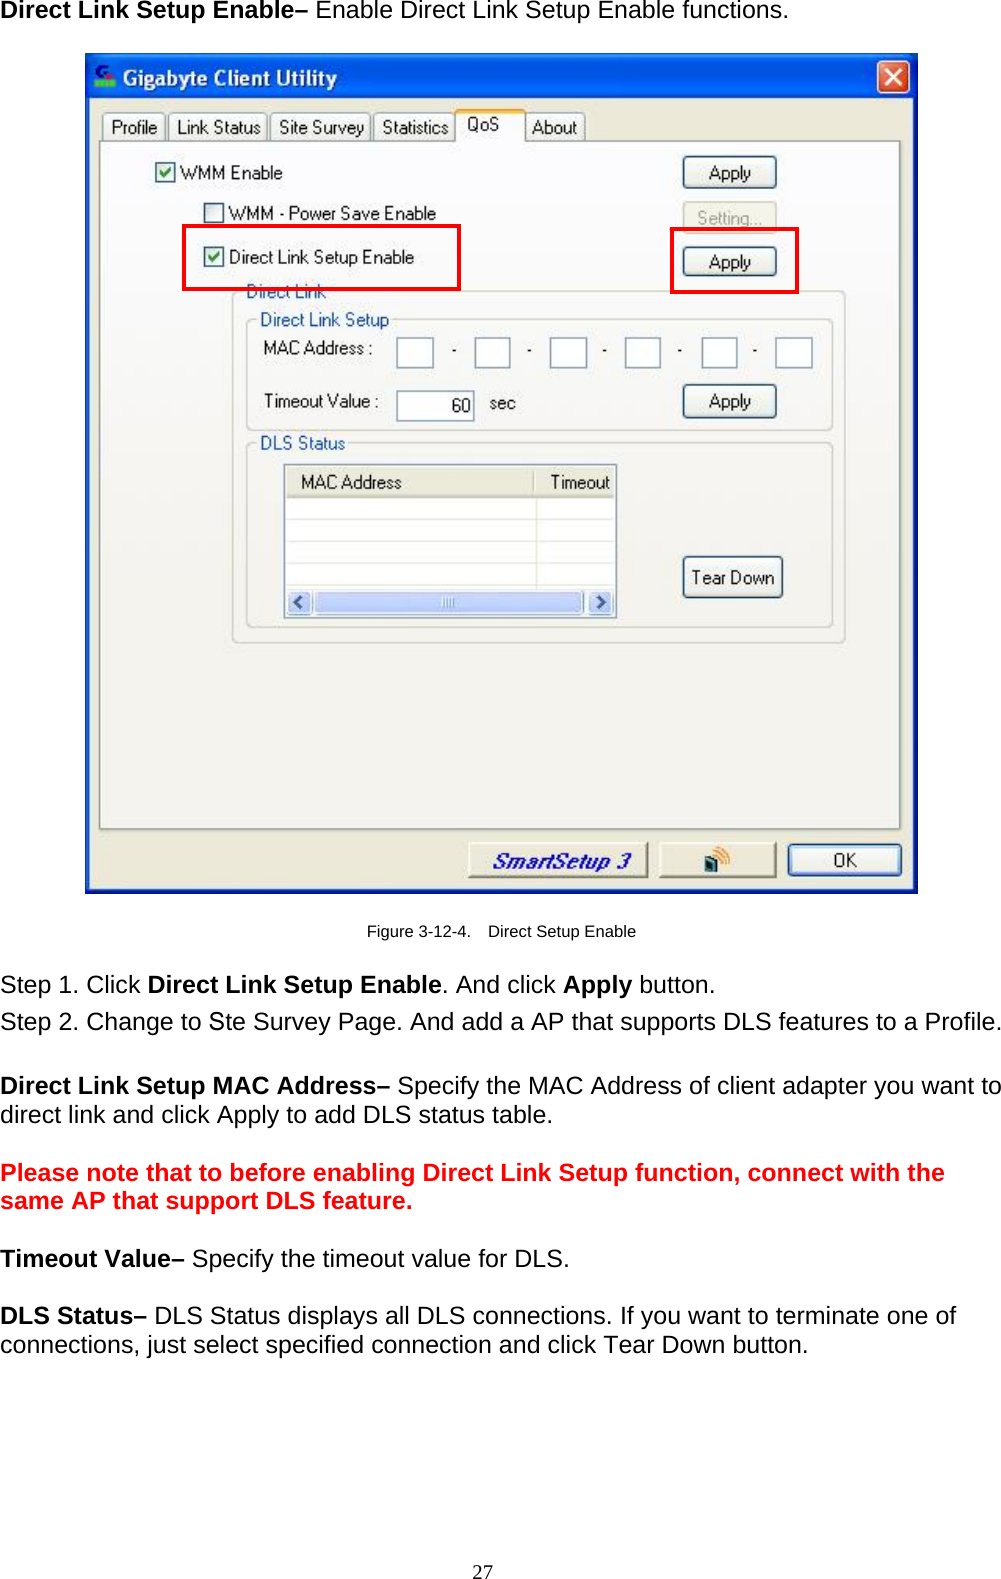 27   Direct Link Setup Enable– Enable Direct Link Setup Enable functions.    Figure 3-12-4.    Direct Setup Enable  Step 1. Click Direct Link Setup Enable. And click Apply button. Step 2. Change to Ste Survey Page. And add a AP that supports DLS features to a Profile.    Direct Link Setup MAC Address– Specify the MAC Address of client adapter you want to direct link and click Apply to add DLS status table.  Please note that to before enabling Direct Link Setup function, connect with the same AP that support DLS feature.  Timeout Value– Specify the timeout value for DLS.  DLS Status– DLS Status displays all DLS connections. If you want to terminate one of connections, just select specified connection and click Tear Down button.  